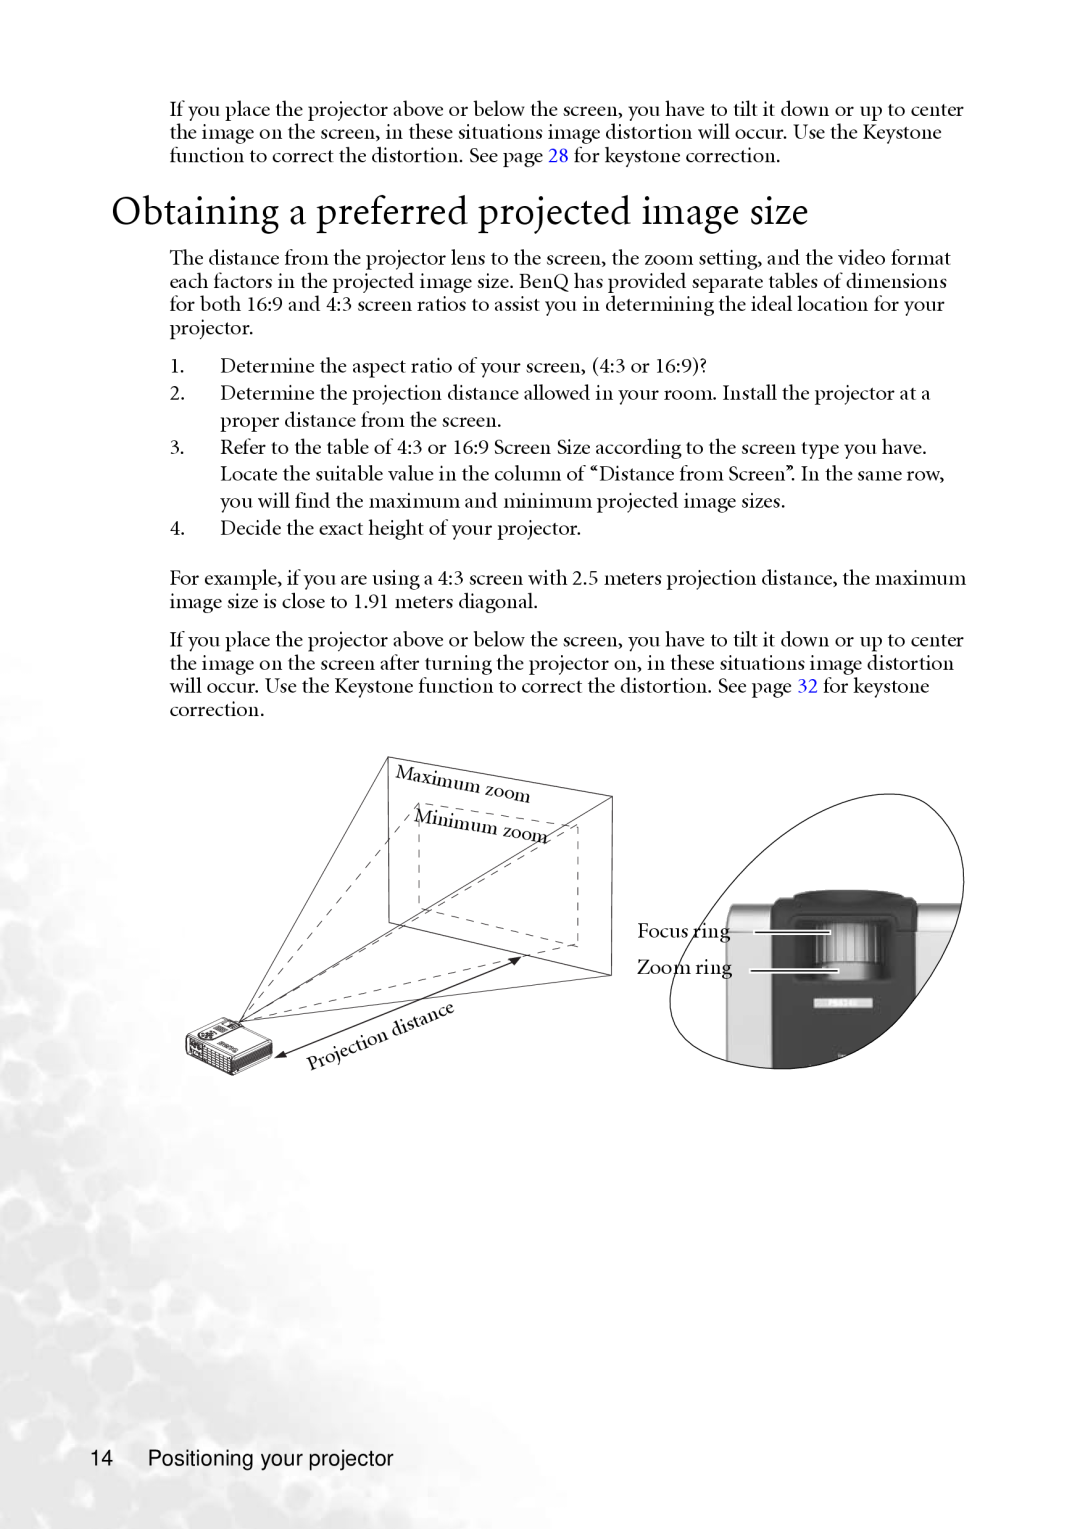 BenQ PB8260 user manual Obtaining a preferred projected image size 